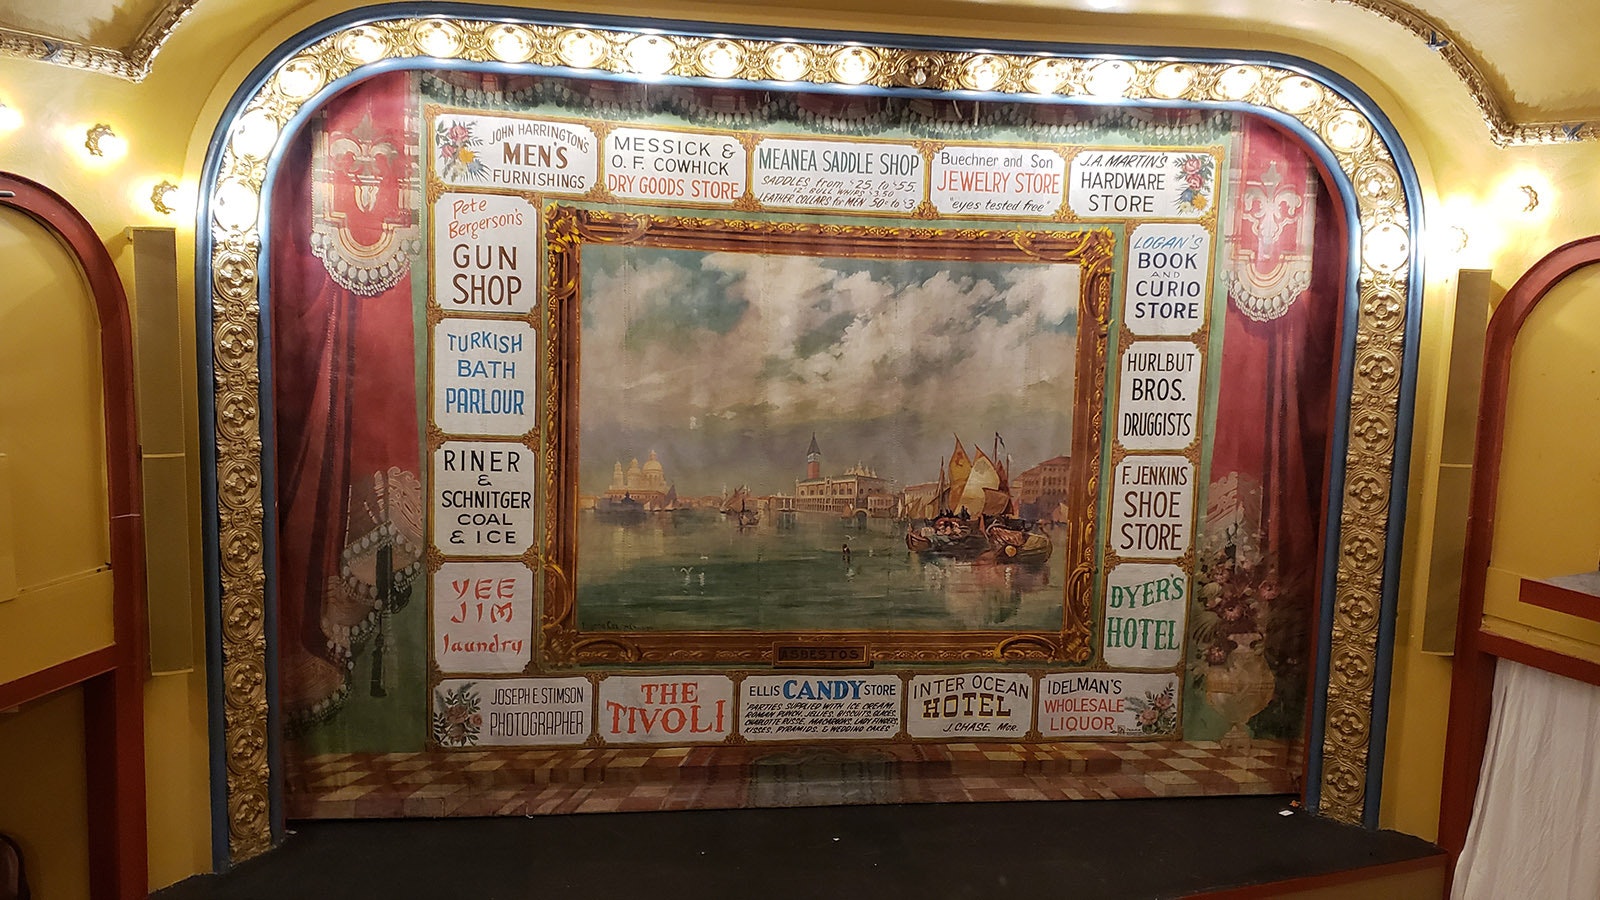 The curtain at the Atlas Theatre in Cheyenne with a Venice scene and word "ASBESTOS" prominently displayed.